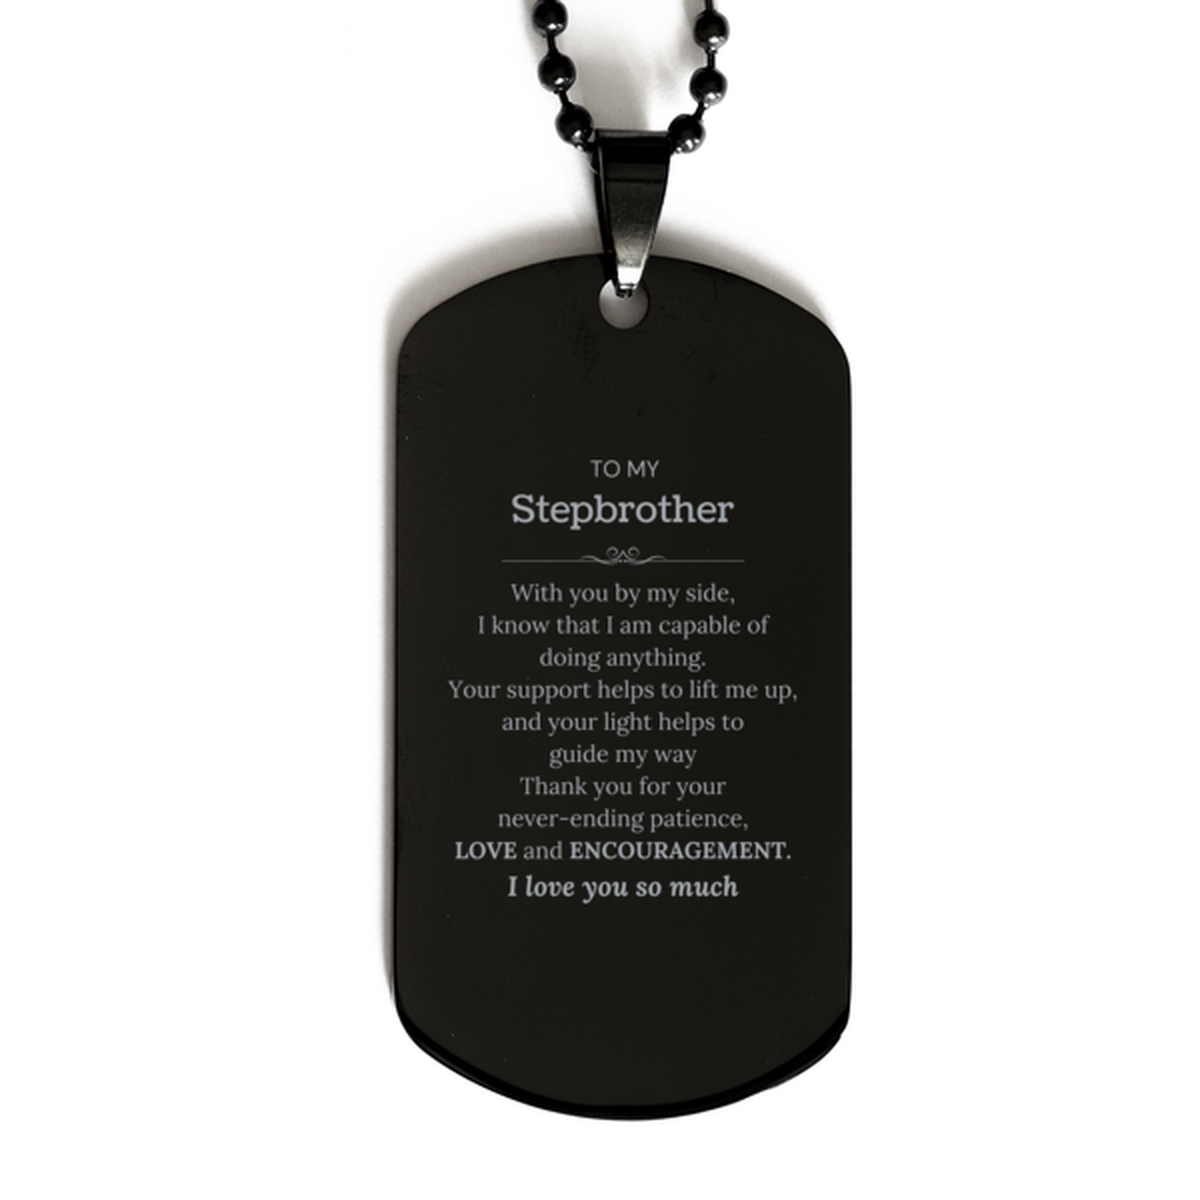 Appreciation Stepbrother Black Dog Tag Gifts, To My Stepbrother Birthday Christmas Wedding Keepsake Gifts for Stepbrother With you by my side, I know that I am capable of doing anything. I love you so much